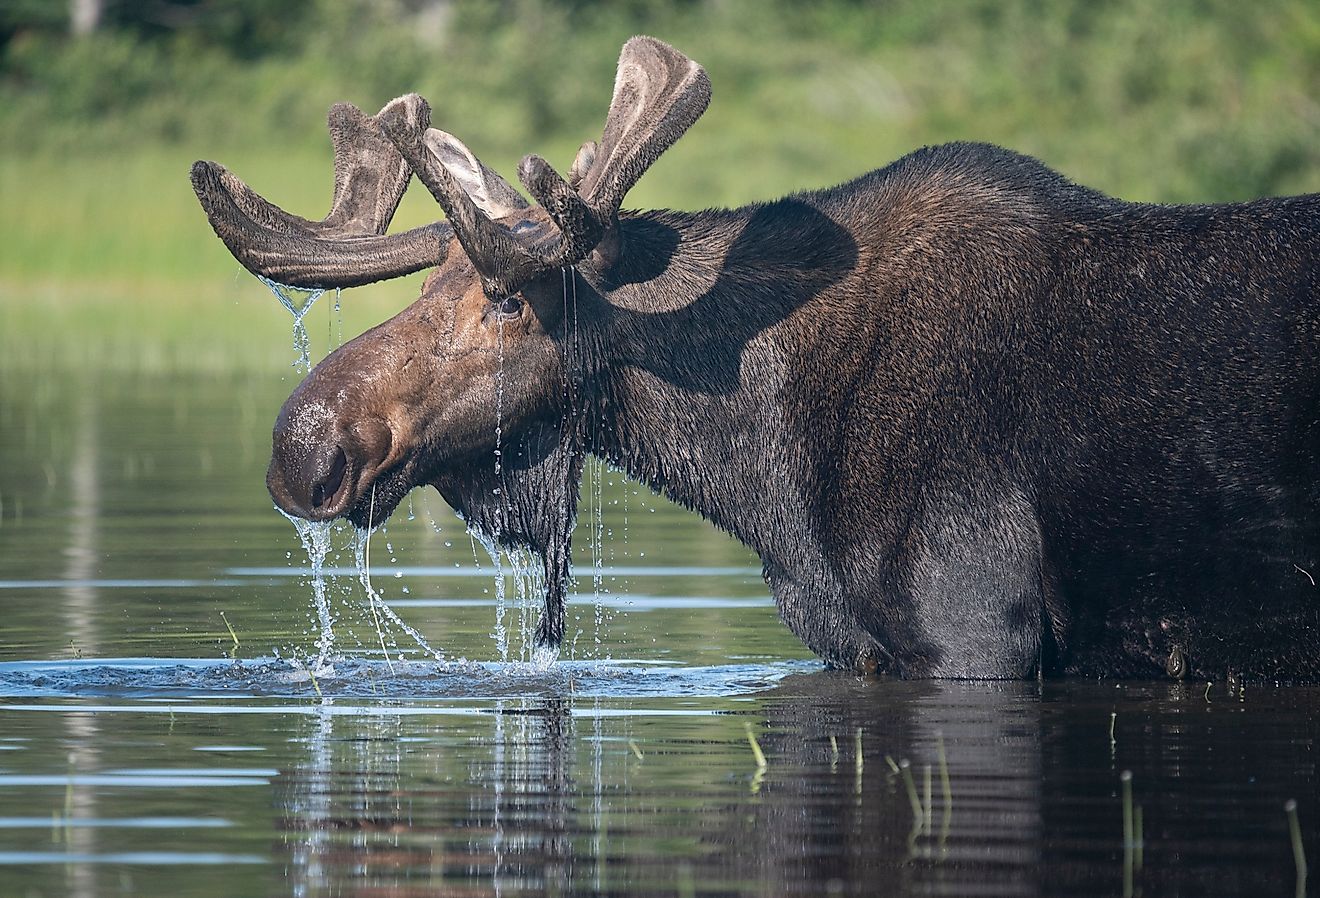 An adult male moose munching on water plants in Maine's North Woods.